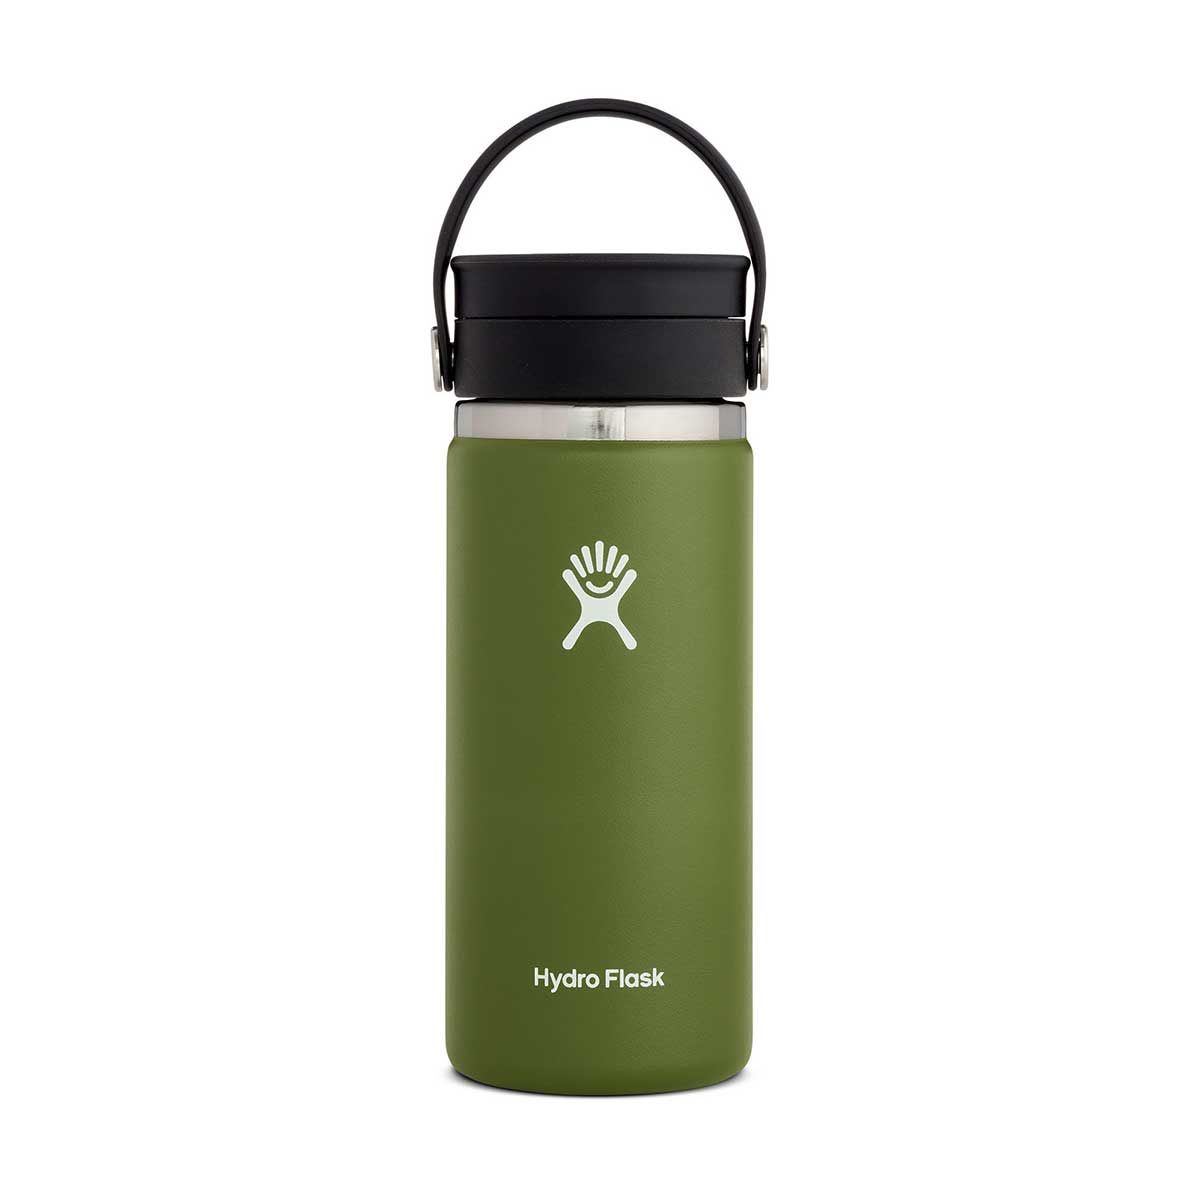 Gourde isotherme de hydro flask olive